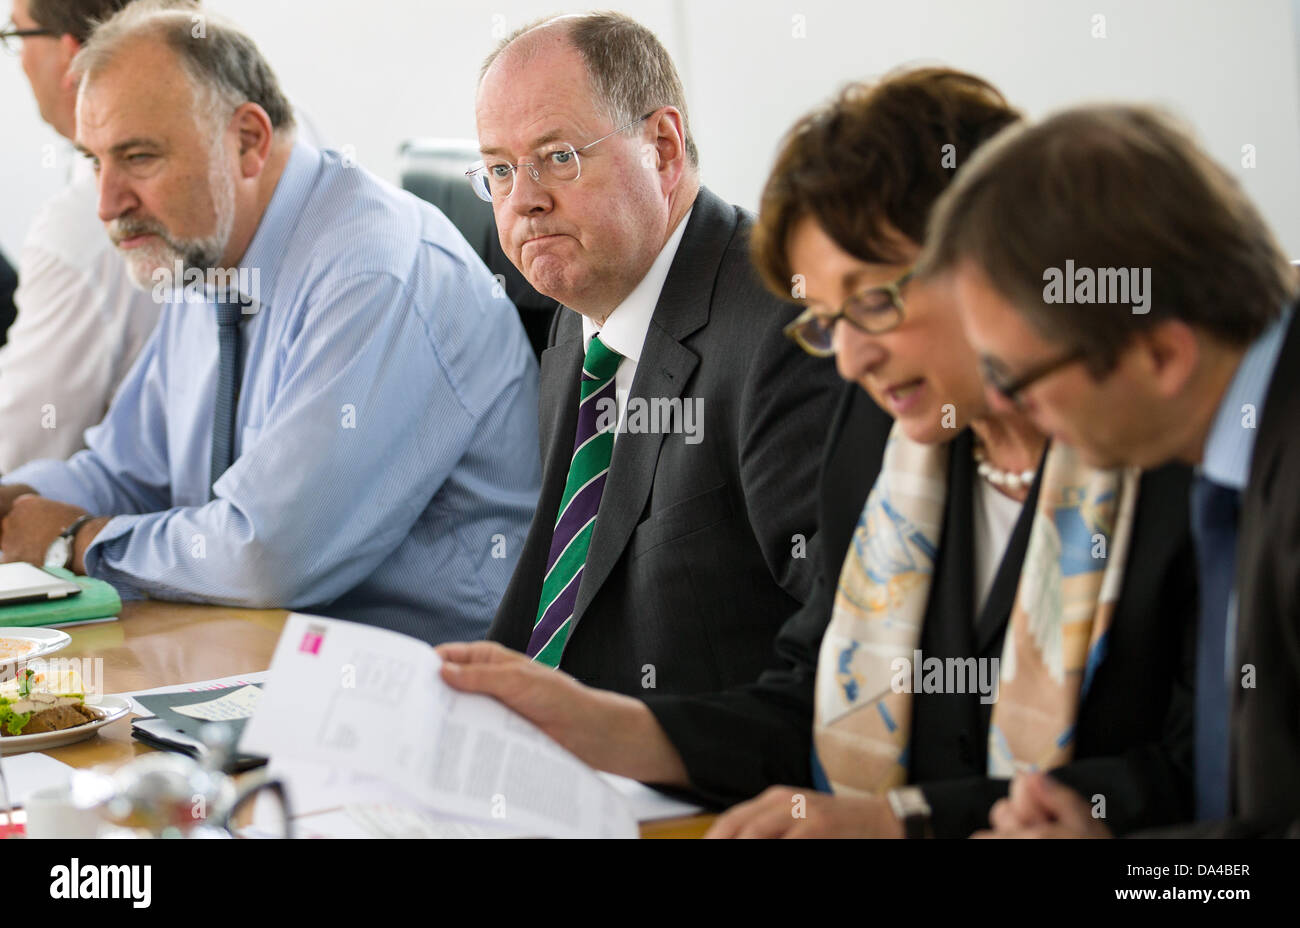 SPD chancellor candidate Peer Steinbrueck (C) meets with members from his team of experts, including Federal Chairman of IG Bau Klaus Wiesehuegel (L-R) and former German Justice Minister Brigitte Zypries, at party headquarters in Berlin, Germany, 03 July 2013. Photo: HANNIBAL Stock Photo